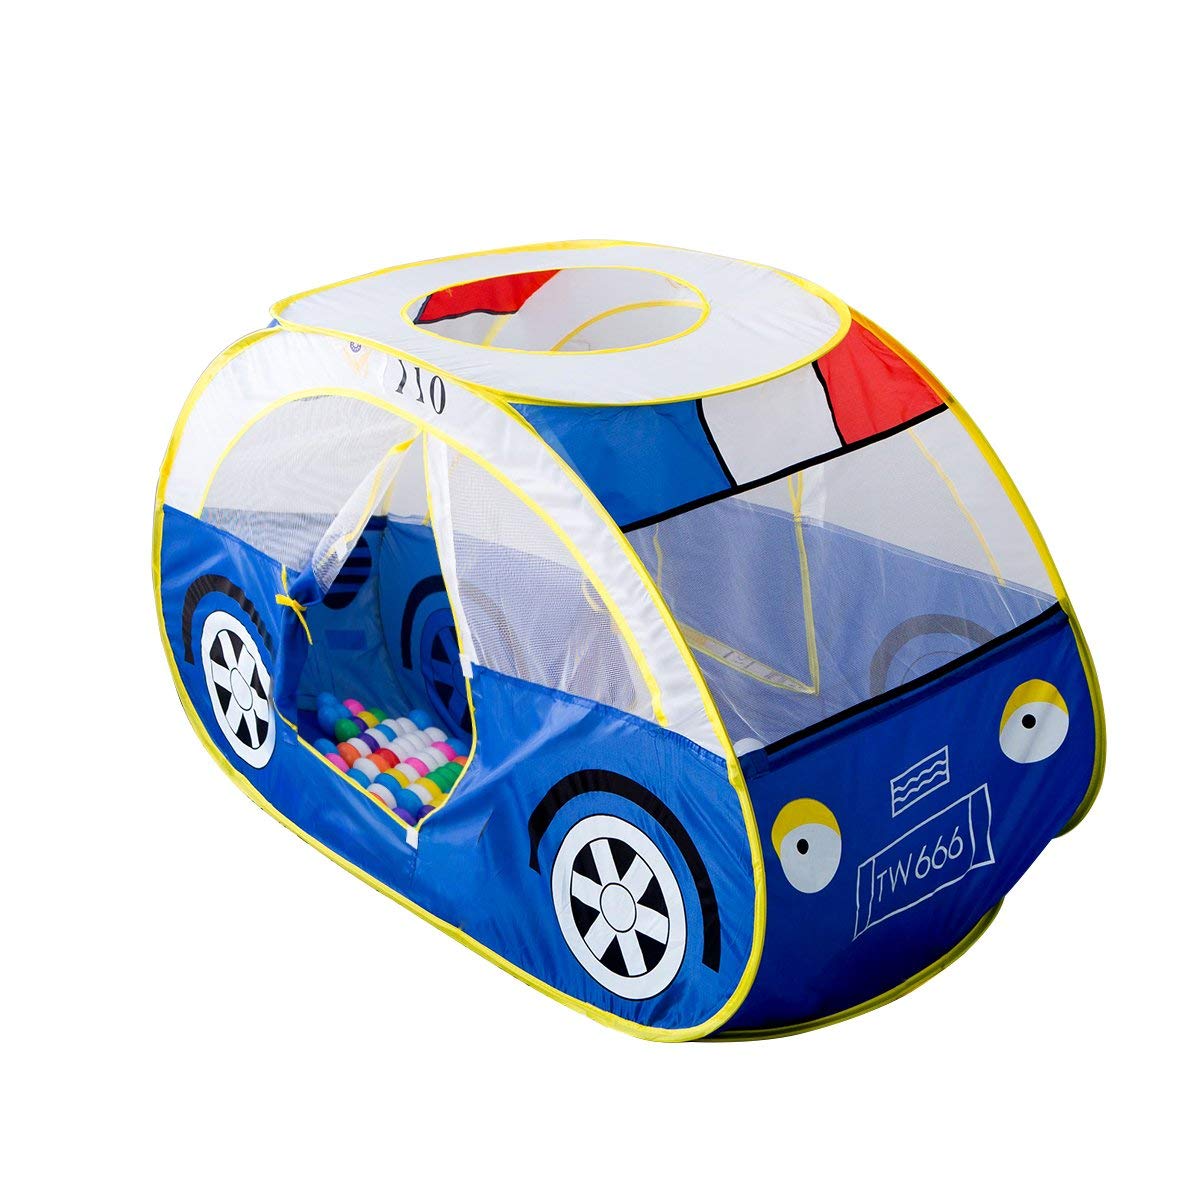 AIOIAI Large Police Car Tents, Waterproof Indoor and Outdoor Cute Car Play House/Castle/Tent Toys as a for 1-8 Years Old Kids/Boy/Girls/Baby/Infant 